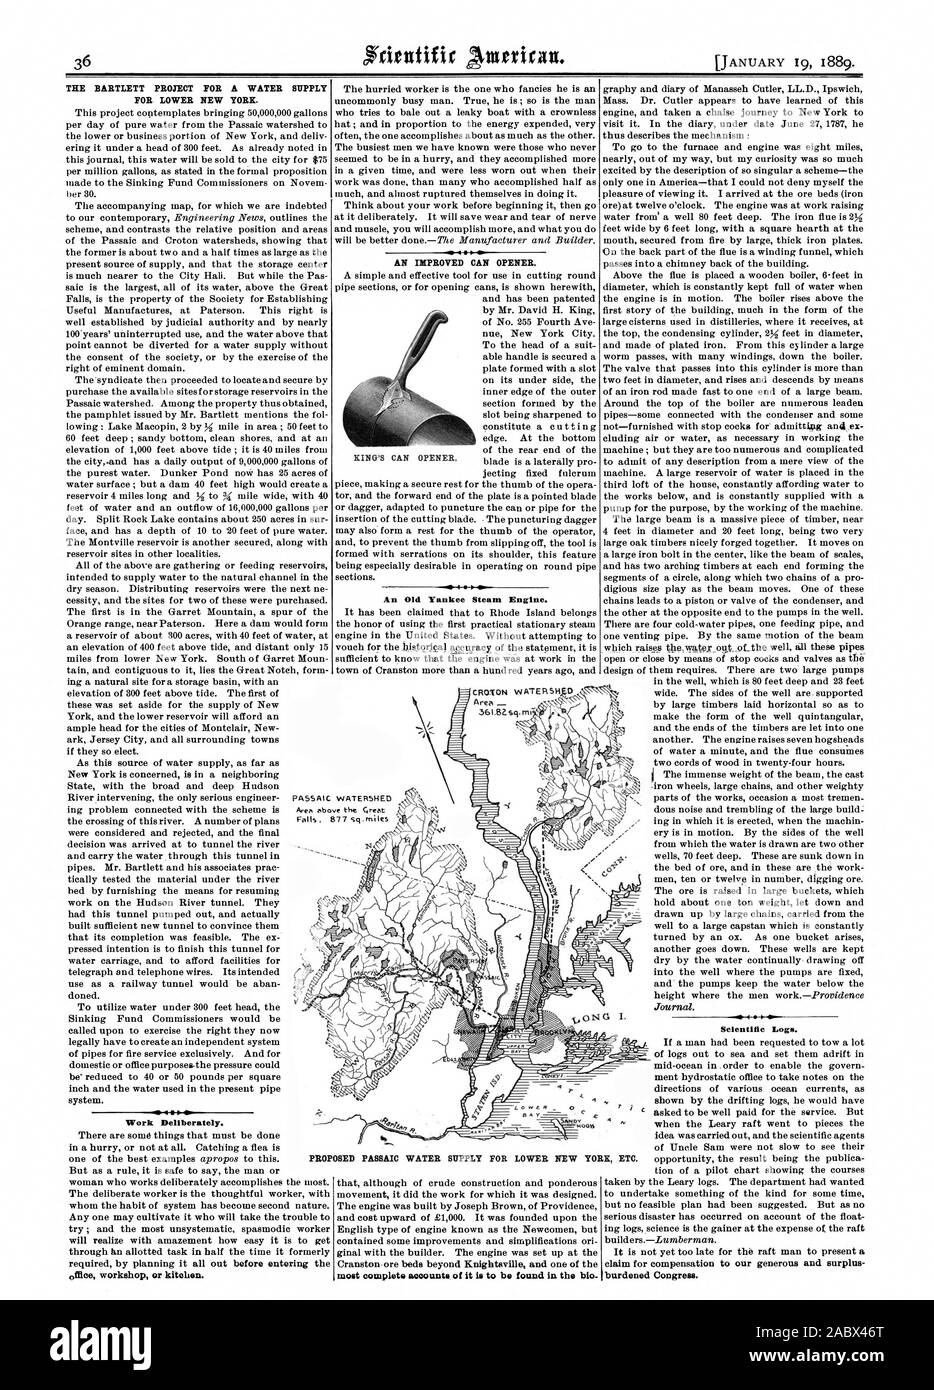 FOR LOWER NEW YORK. Work Deliberately. AN IMPROVED CAN OPENER. 4 Scientific Logo. ETC., scientific american, 1889-01-19 Stock Photo